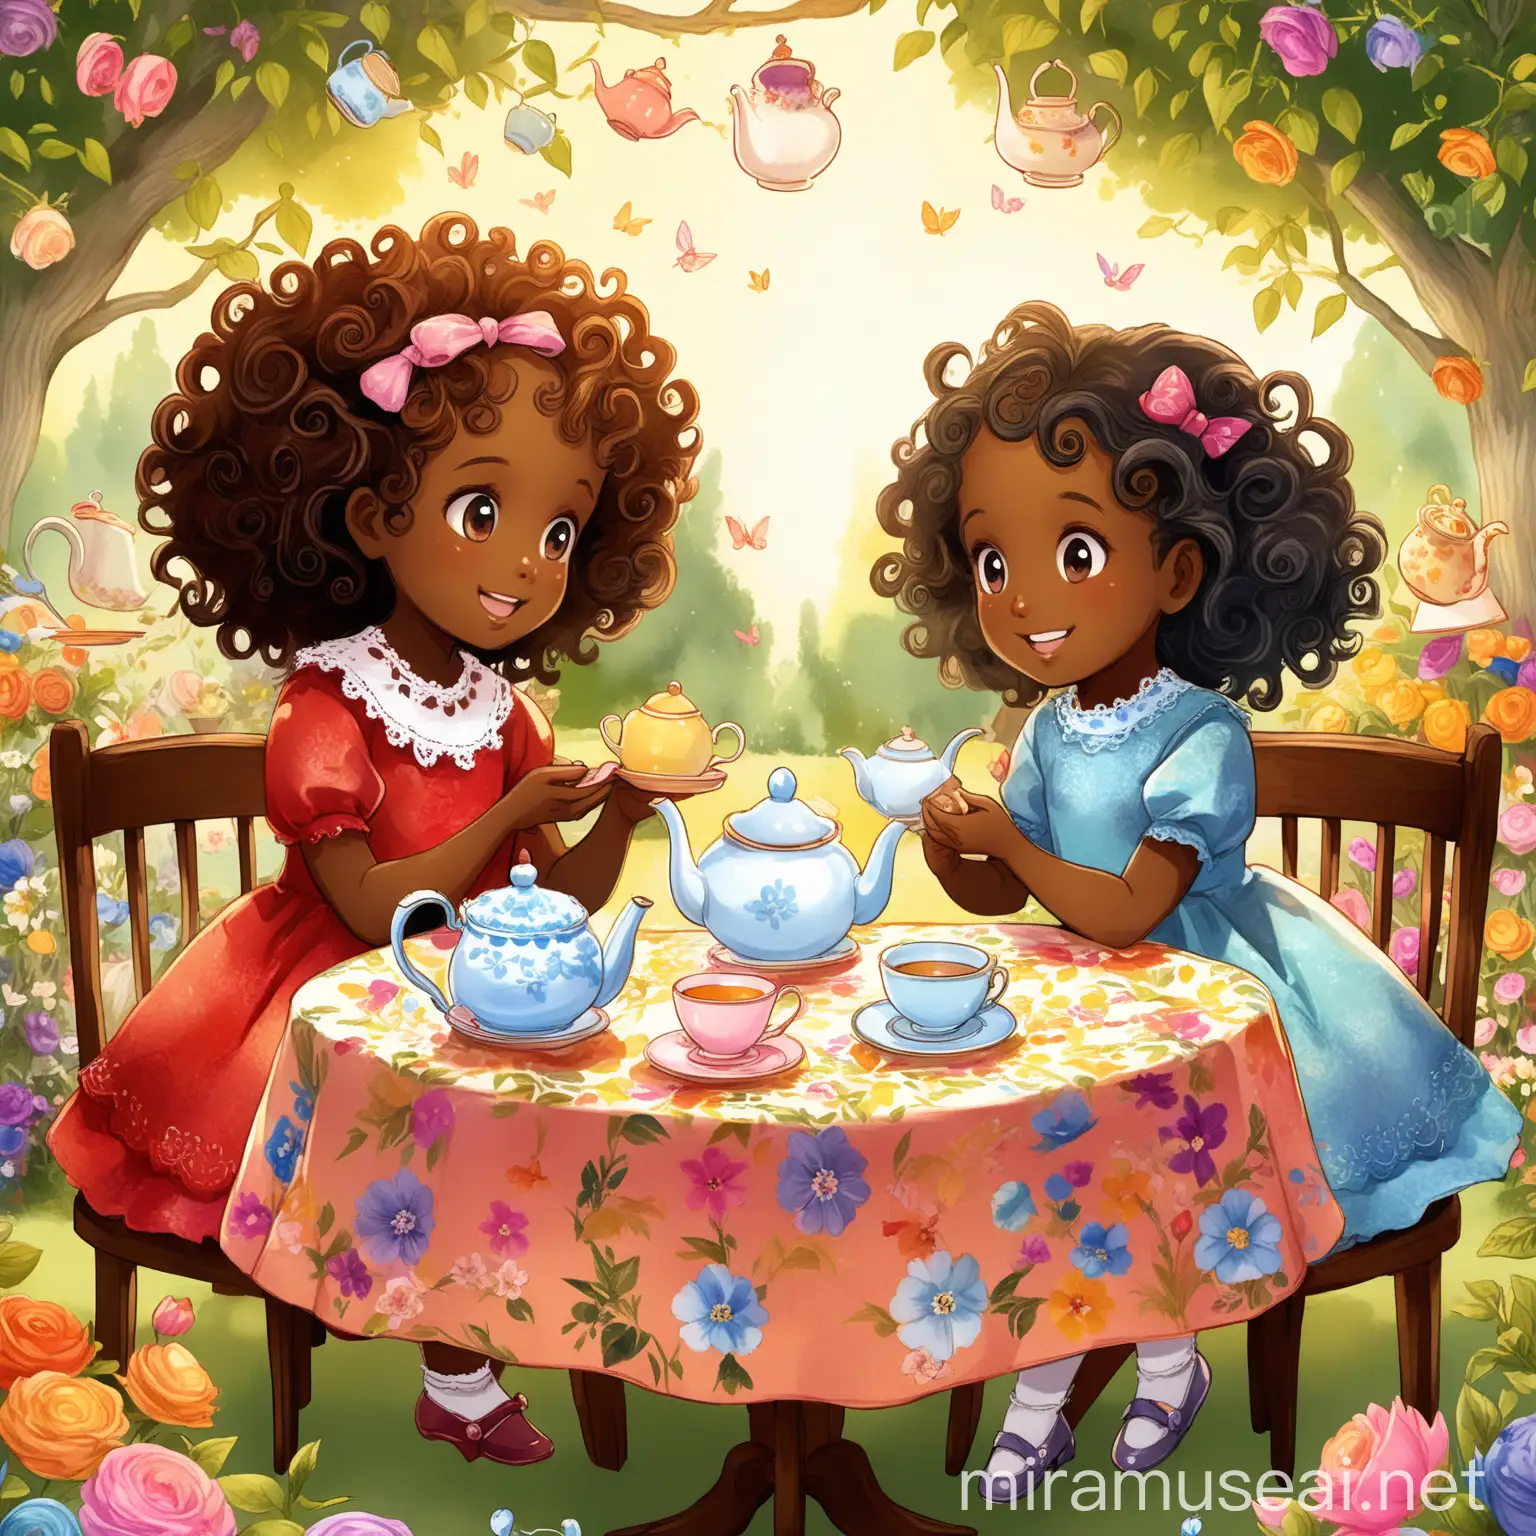 Illustration of two little black girls having a tea party in a blooming garden, sitting at a small wooden table covered with a floral tablecloth, surrounded by colorful teacups, saucers, and a teapot, with a serene atmosphere, cozy, whimsical, warm lighting, low angle, playful, vibrant, beautiful dresses, curly hair, joyful expressions, children's book